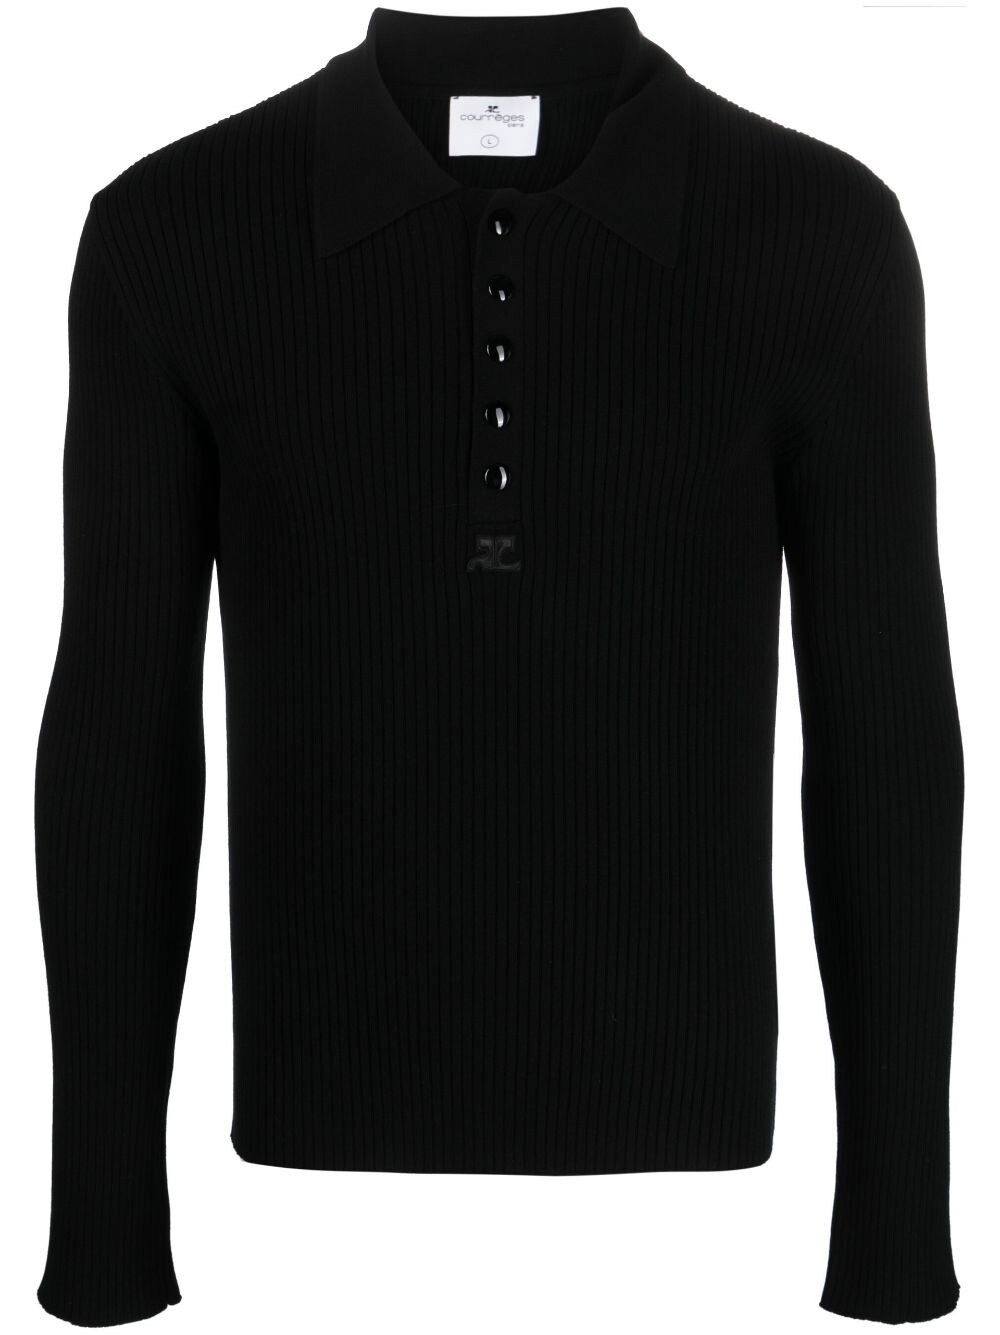 ribbed-knit long-sleeved polo shirt, Courrèges